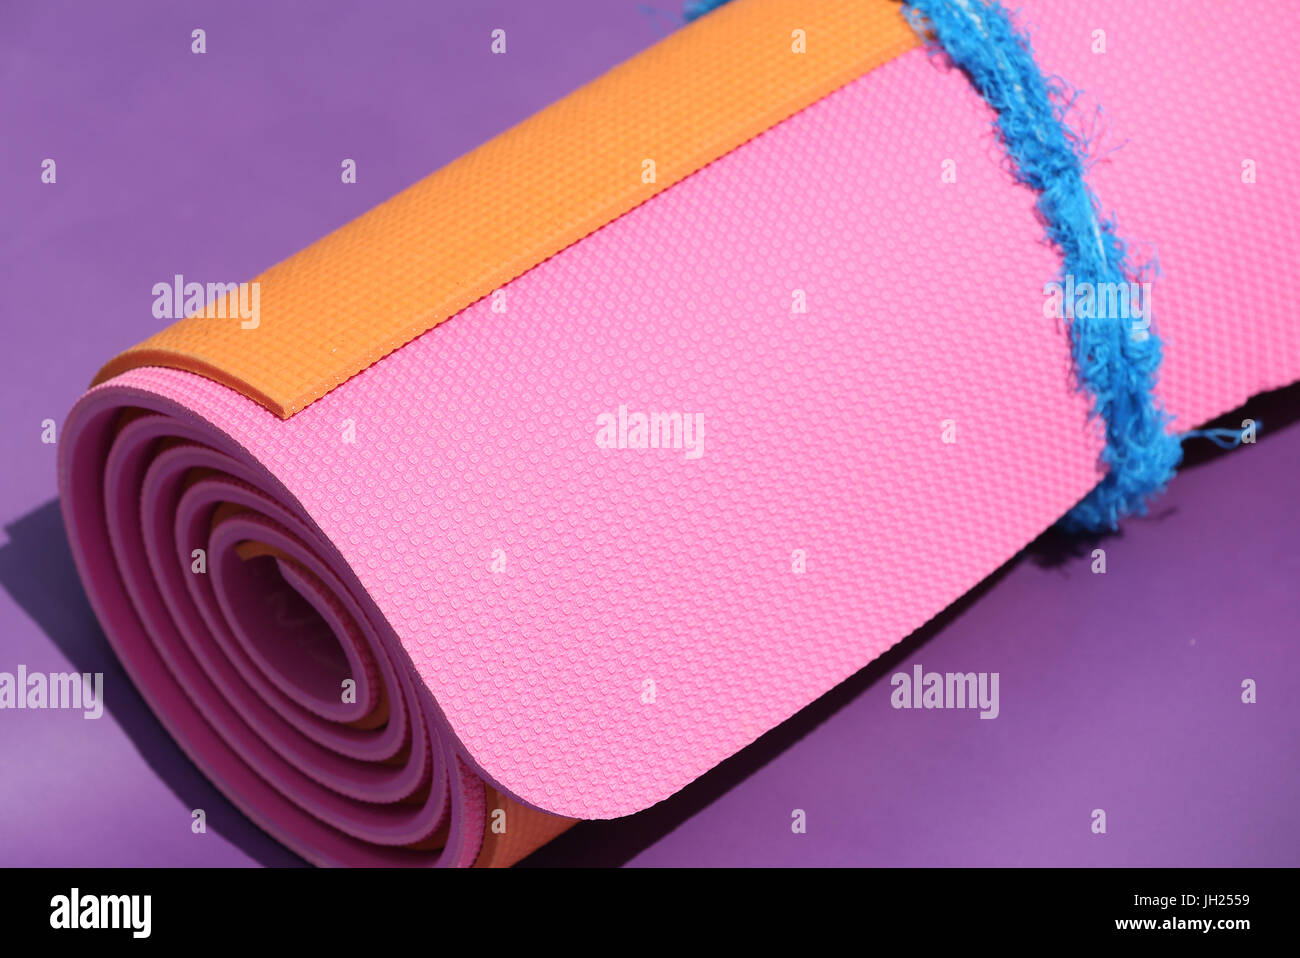 Rolled up pink yoga mat. France Stock 